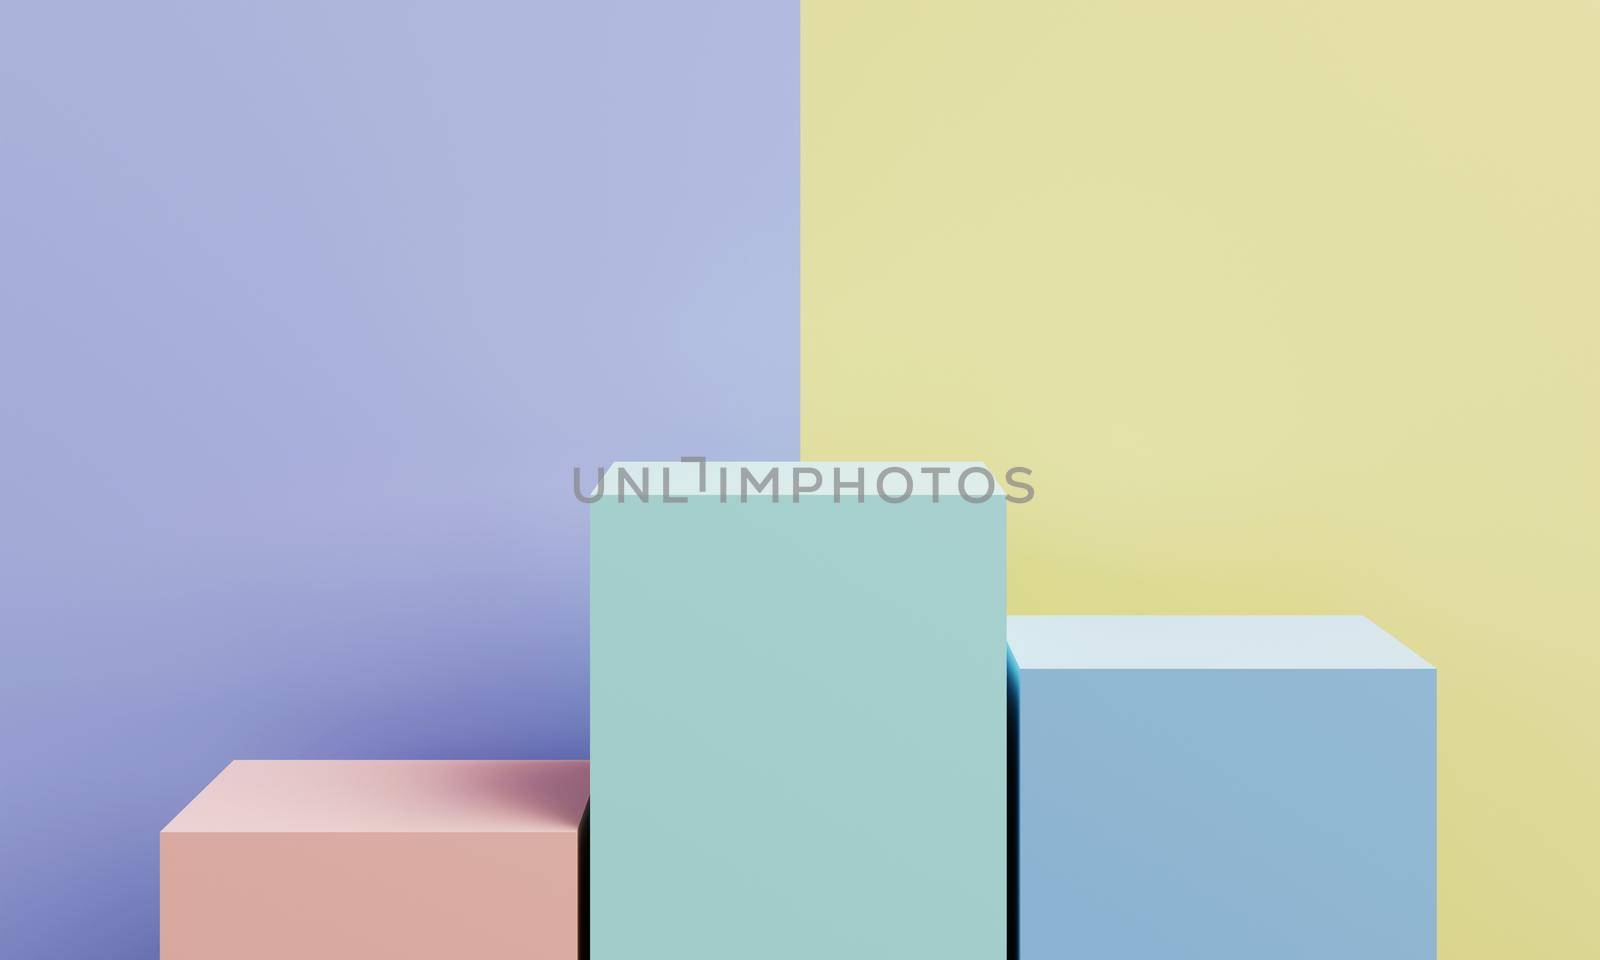 Abstract geometric shape in pastel colorful for product podium presentation background. Art and Color concept. 3D illustration rendering by MiniStocker